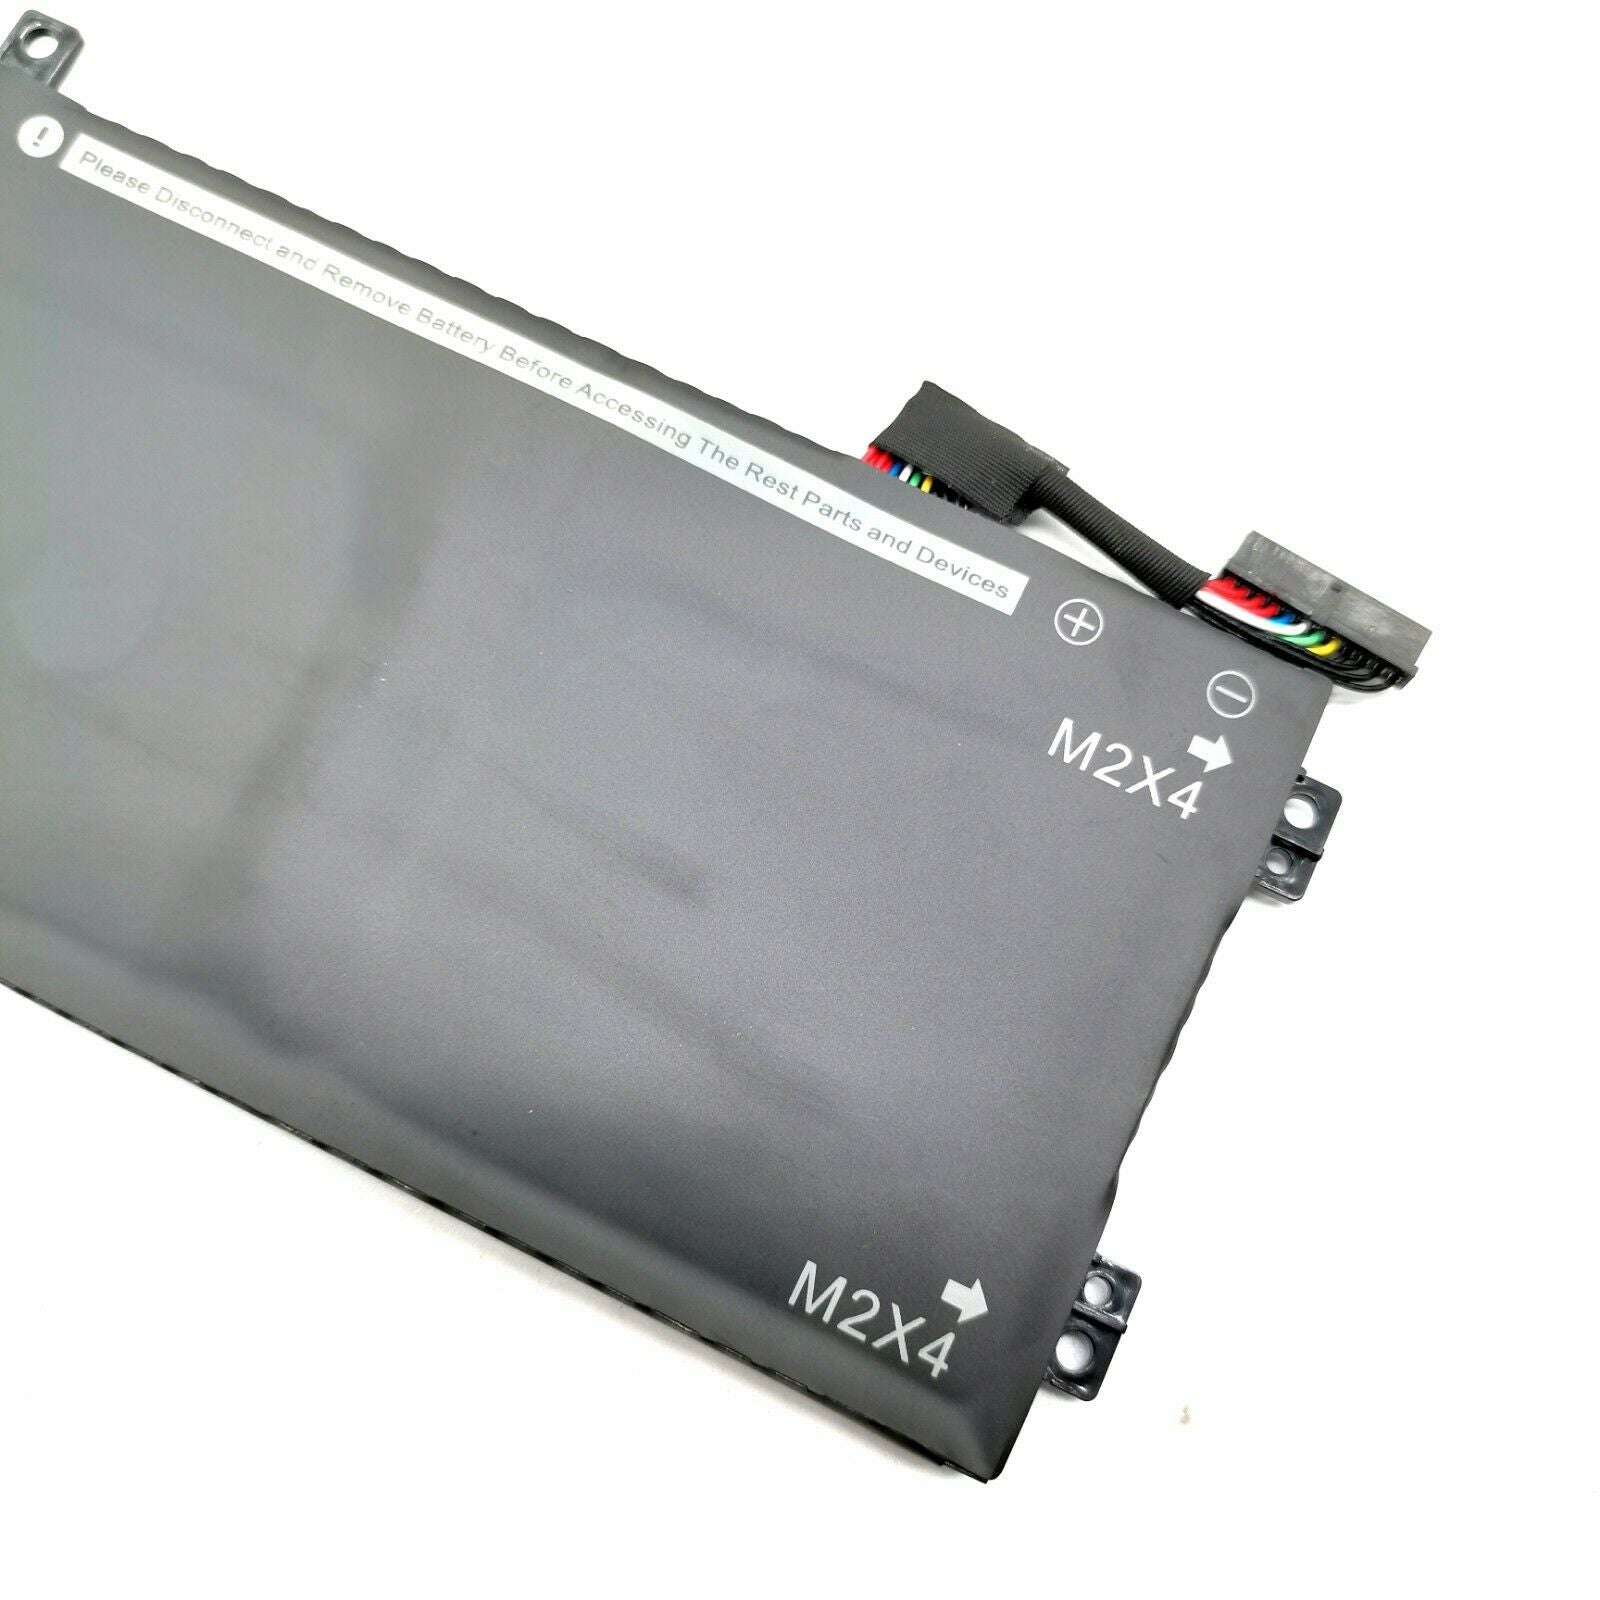 Dell XPS 15 9560 9550 Laptop Battery